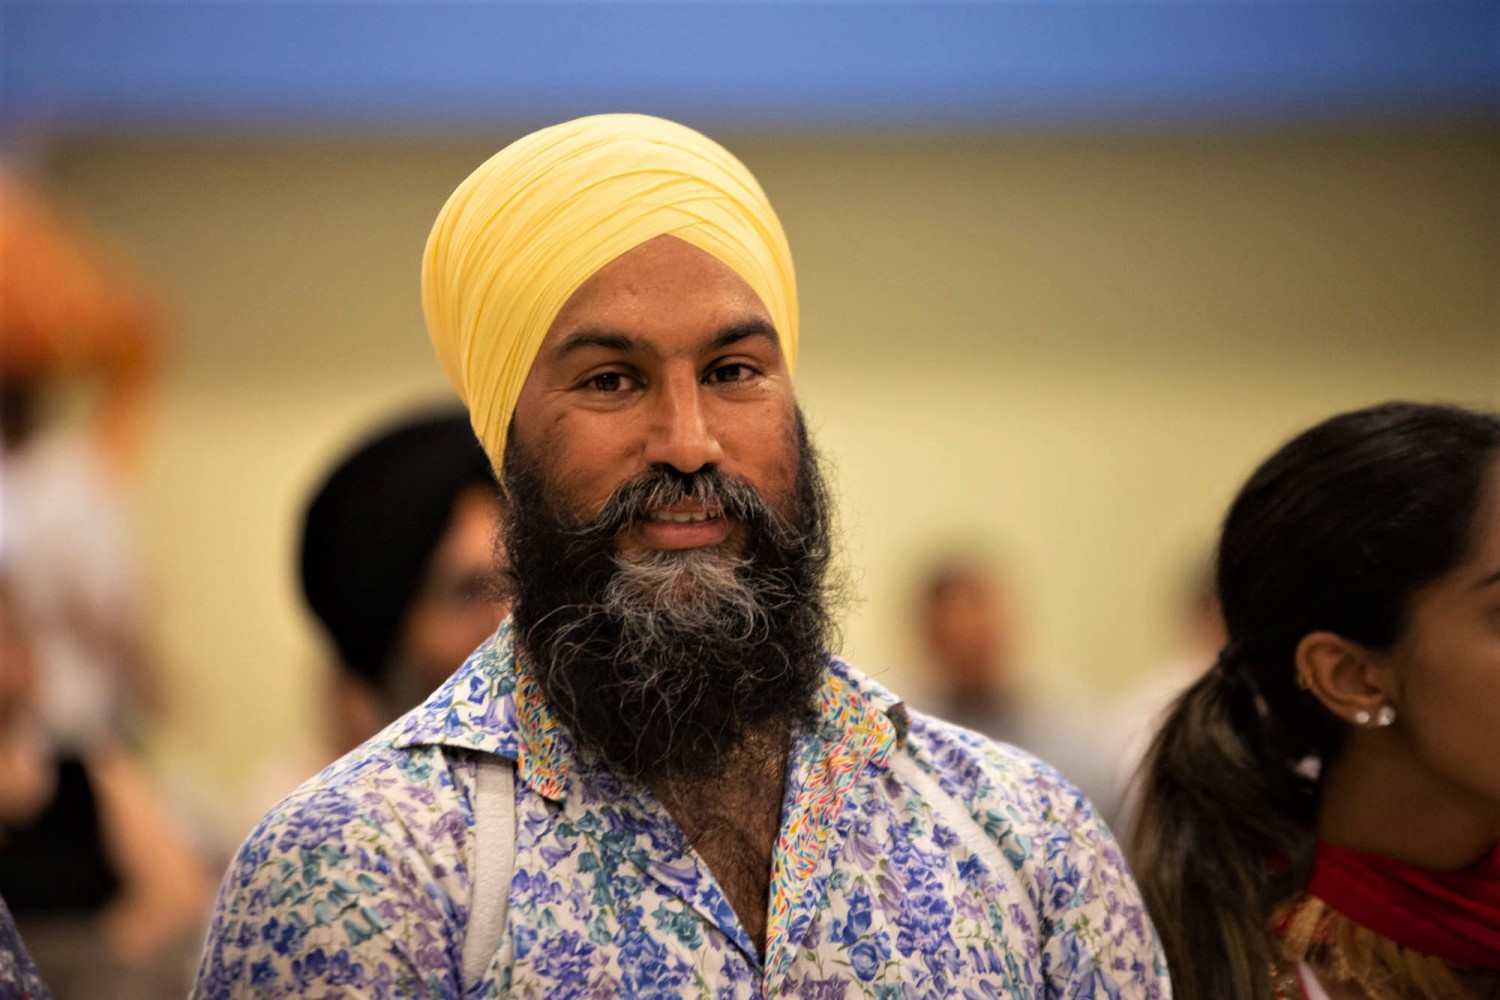 Singh reaffirms Brampton infrastructure commitments even in a coalition, but funding details remain vague 